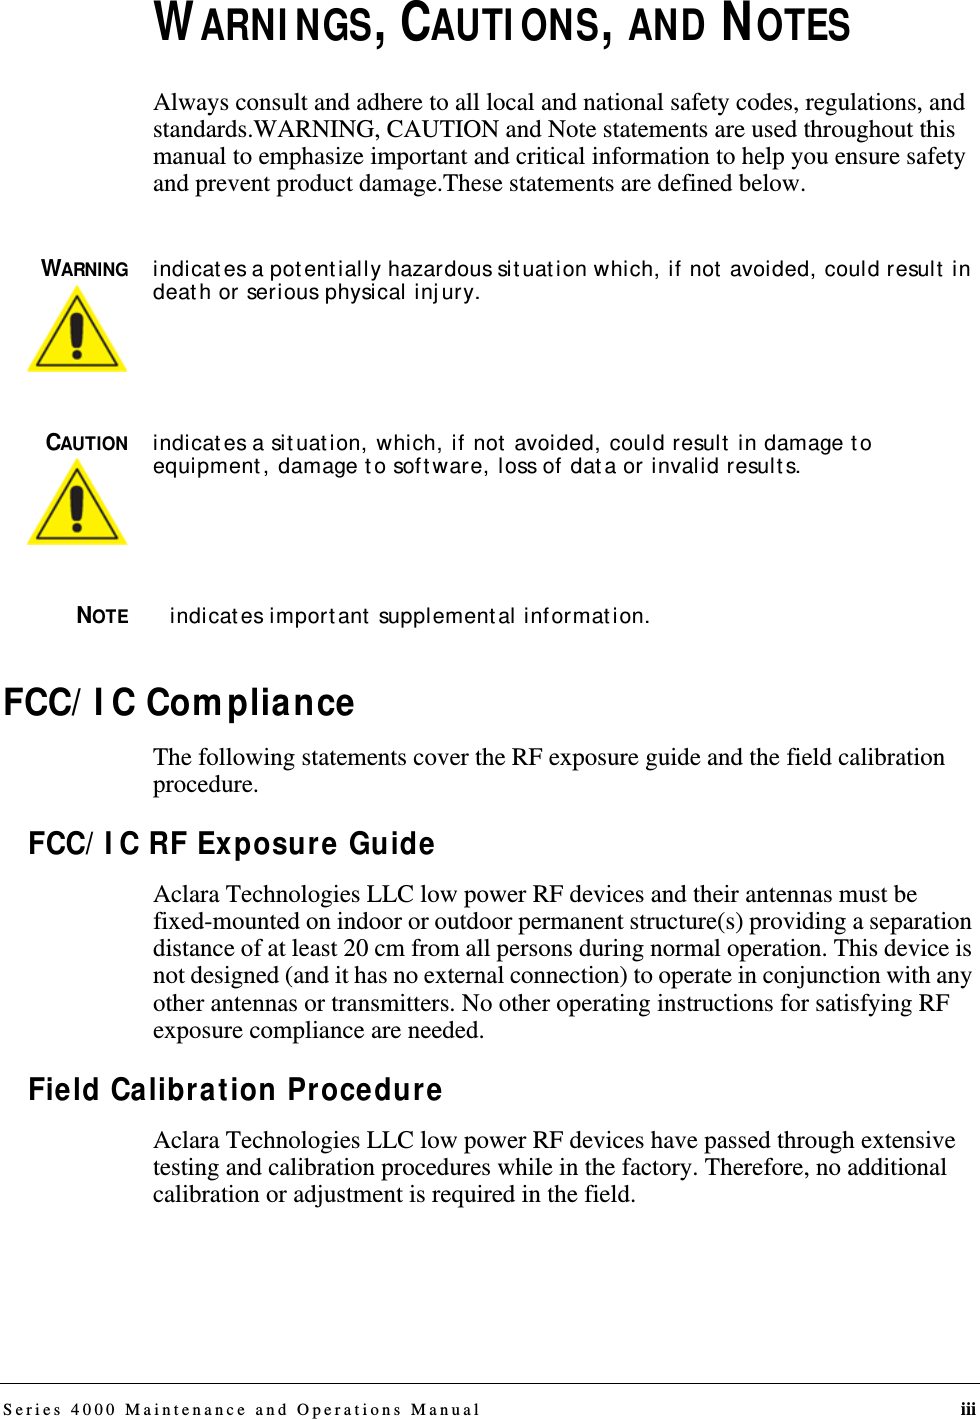 Series 4000 Maintenance and Operations Manual iiiWARNINGS, CAUTIONS, AND NOTESAlways consult and adhere to all local and national safety codes, regulations, and standards.WARNING, CAUTION and Note statements are used throughout this manual to emphasize important and critical information to help you ensure safety and prevent product damage.These statements are defined below.WARNINGindicates a potentially hazardous situation which, if not avoided, could result in death or serious physical injury.CAUTIONindicates a situation, which, if not avoided, could result in damage to equipment, damage to software, loss of data or invalid results.NOTEindicates important supplemental information.FCC/IC ComplianceThe following statements cover the RF exposure guide and the field calibration procedure.FCC/IC RF Exposure GuideAclara Technologies LLC low power RF devices and their antennas must be fixed-mounted on indoor or outdoor permanent structure(s) providing a separation distance of at least 20 cm from all persons during normal operation. This device is not designed (and it has no external connection) to operate in conjunction with any other antennas or transmitters. No other operating instructions for satisfying RF exposure compliance are needed.Field Calibration ProcedureAclara Technologies LLC low power RF devices have passed through extensive testing and calibration procedures while in the factory. Therefore, no additional calibration or adjustment is required in the field.DRAFT